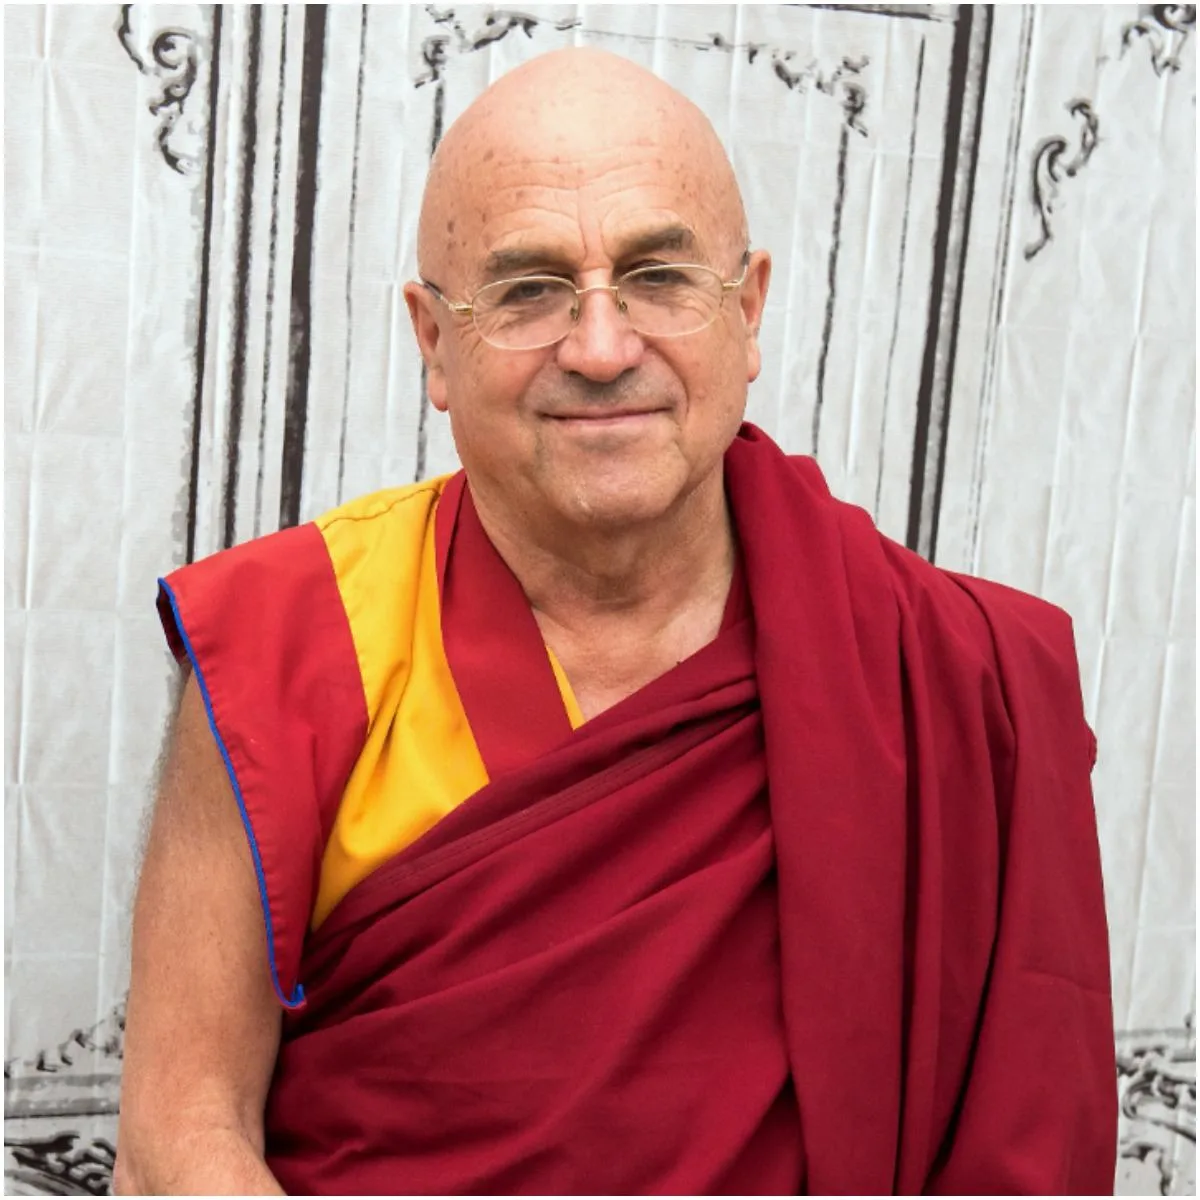 Matthieu Ricard Quotes On Happiness